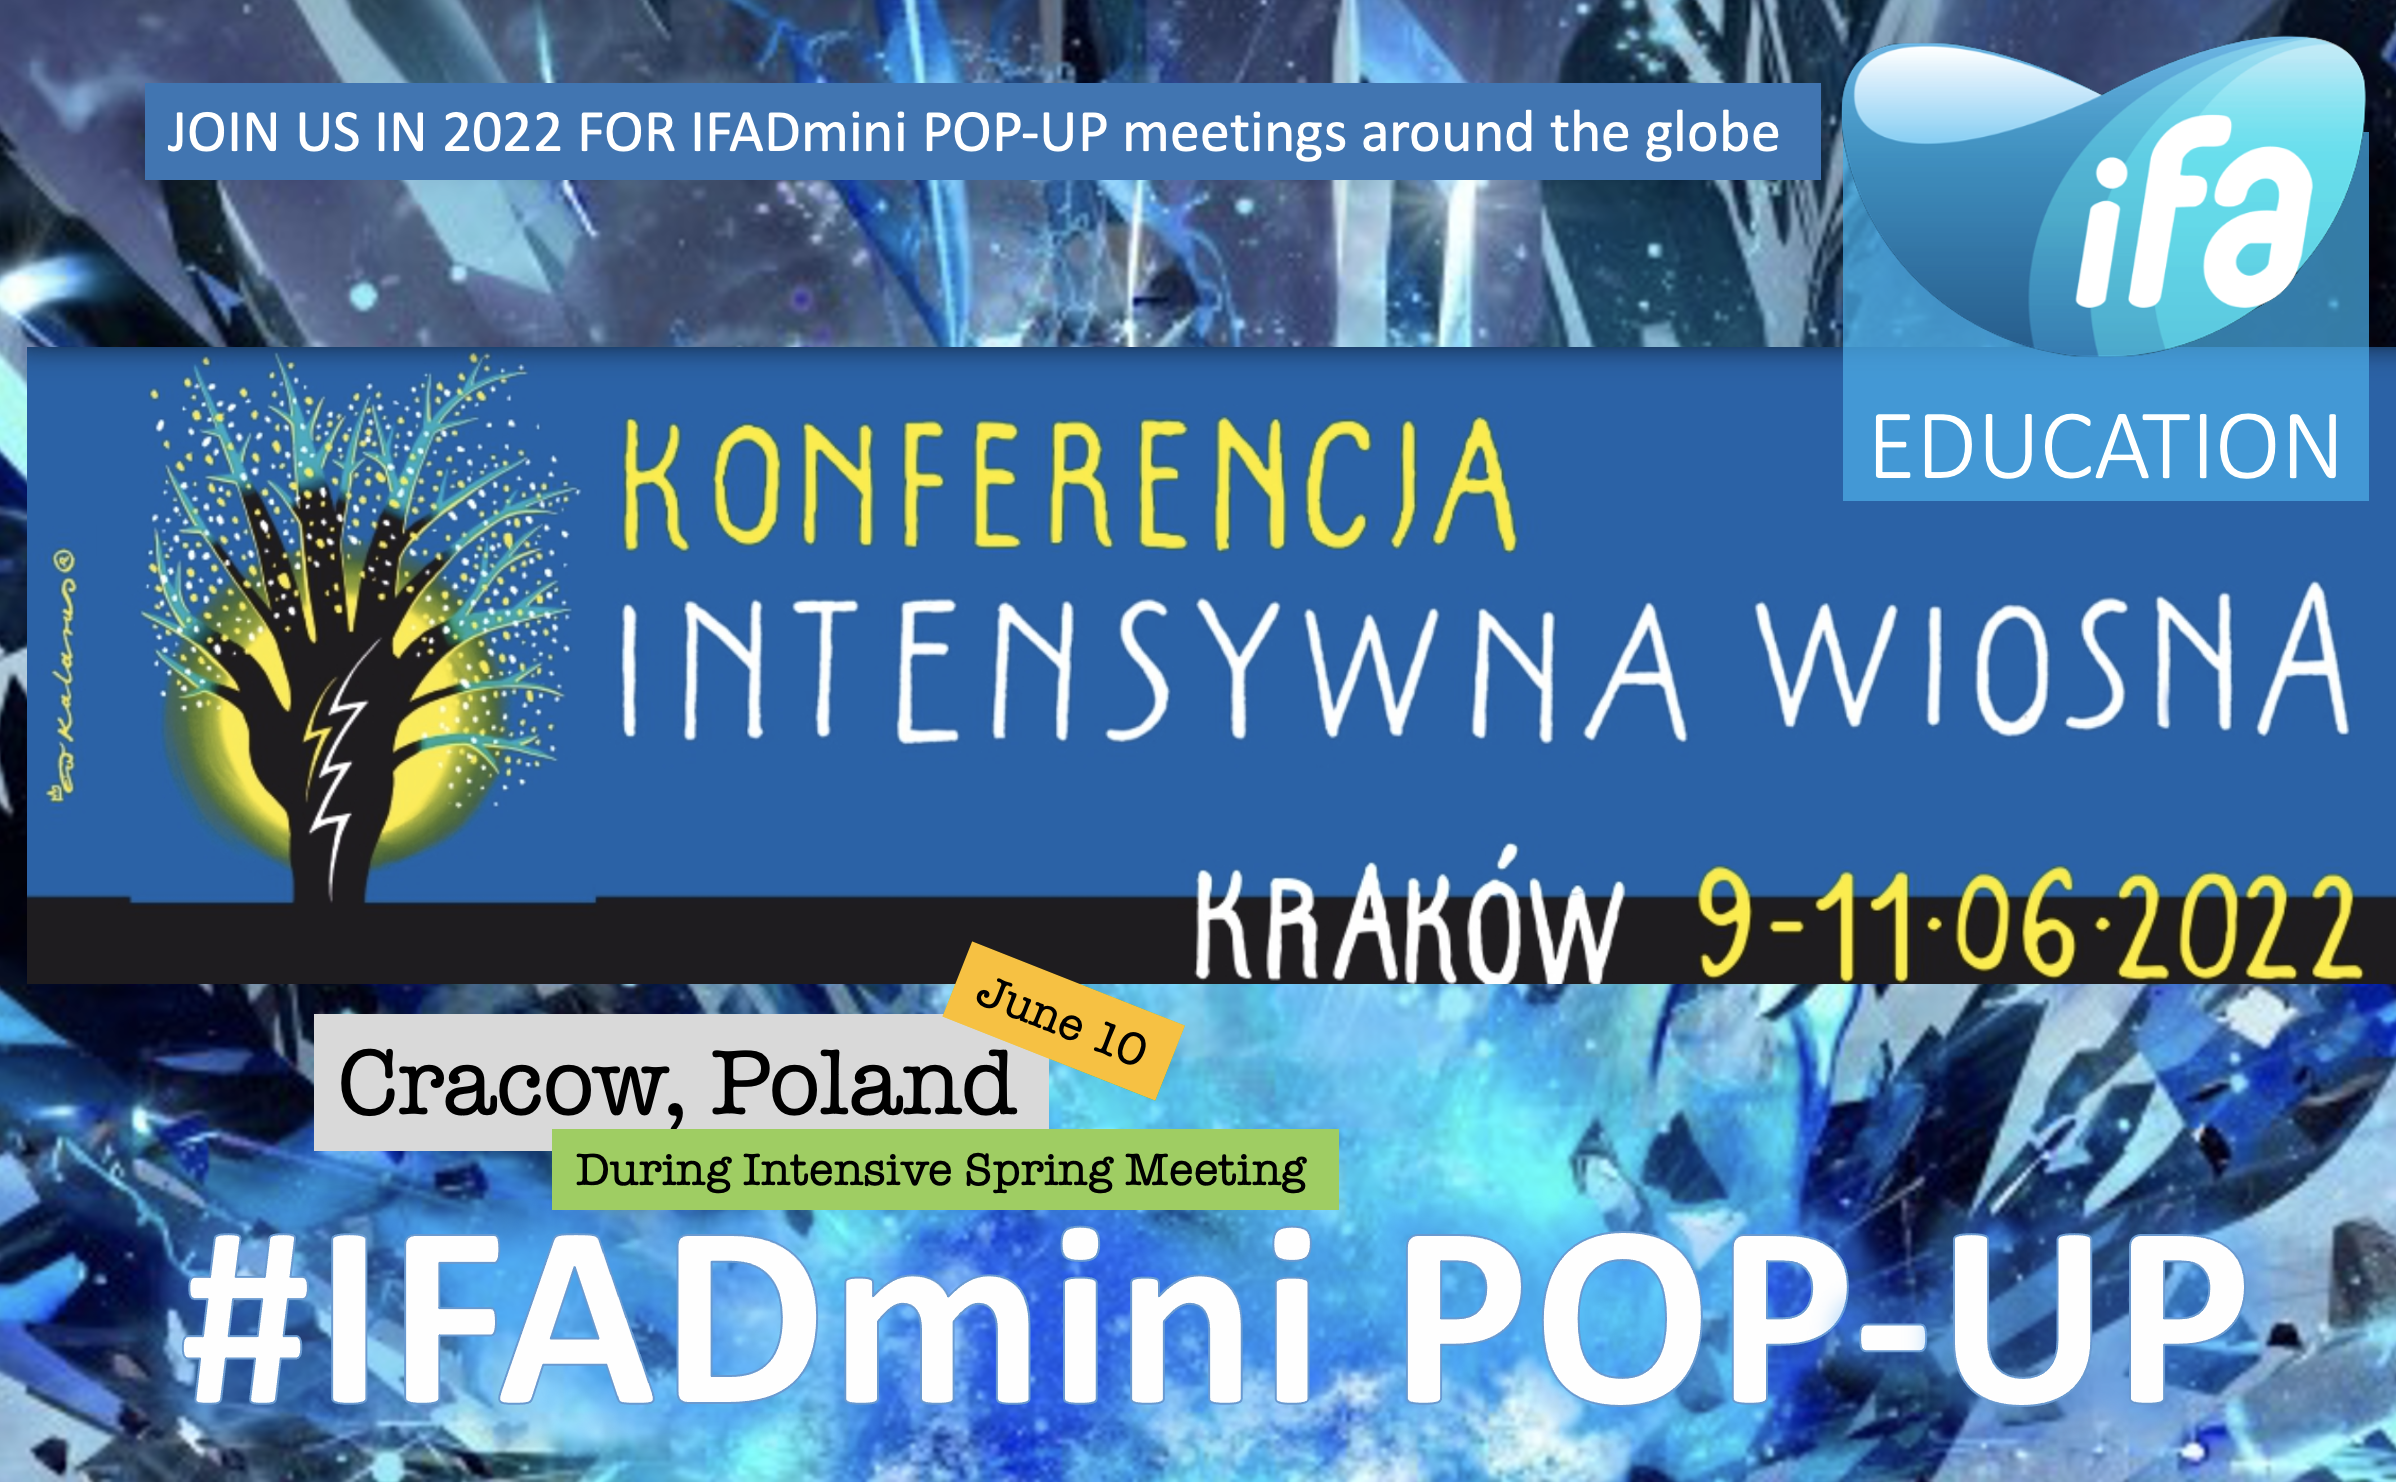 Join us for #iFADmini pop-up meeting in Cracow 2022 (June 10th) (Copy)